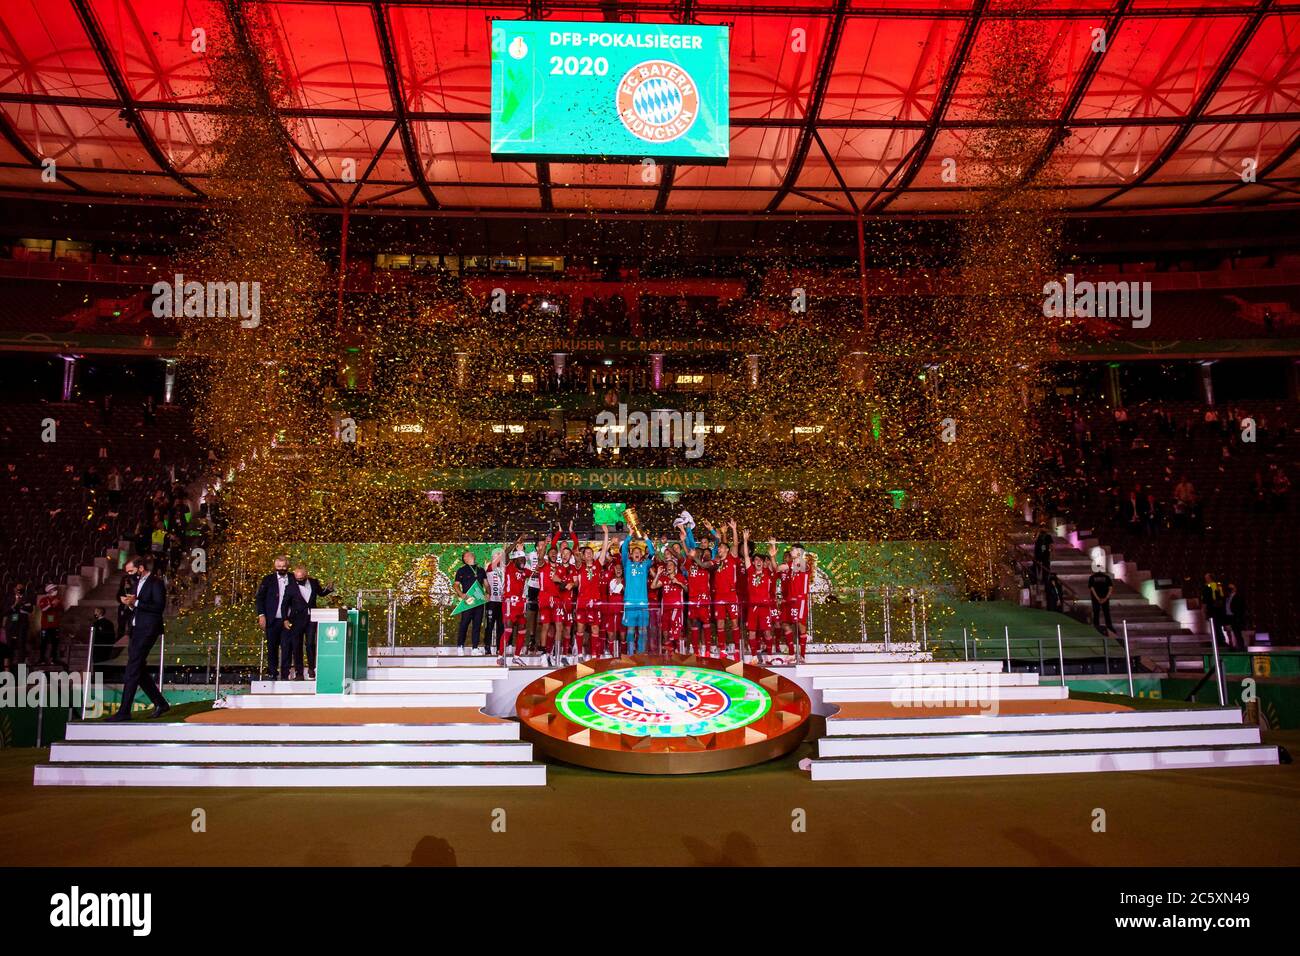 Berlin, Germany, 4 th July 2020,  winner ceremony: Manuel NEUER, FCB 1 lifts trophy, Leon GORETZKA, FCB 18 Benjamin PAVARD, FCB 5 Robert LEWANDOWSKI, FCB 9 Ivan PERISIC, FCB 14 FCB Co-Trainer Hermann GERLAND, Lucas HERNANDEZ (FCB 21) Thomas MUELLER, MÜLLER, FCB 25 with trophy at the DFB Pokal Final match  FC BAYERN MUENCHEN - BAYER 04 LEVERKUSEN 4-2  in season 2019/2020 , FCB Foto: © Peter Schatz / Alamy Live News / Kevin Voigt/Jan Huebner/Pool   - DFB REGULATIONS PROHIBIT ANY USE OF PHOTOGRAPHS as IMAGE SEQUENCES and/or QUASI-VIDEO -  National and international News-Agencies OUT Editorial Use Stock Photo